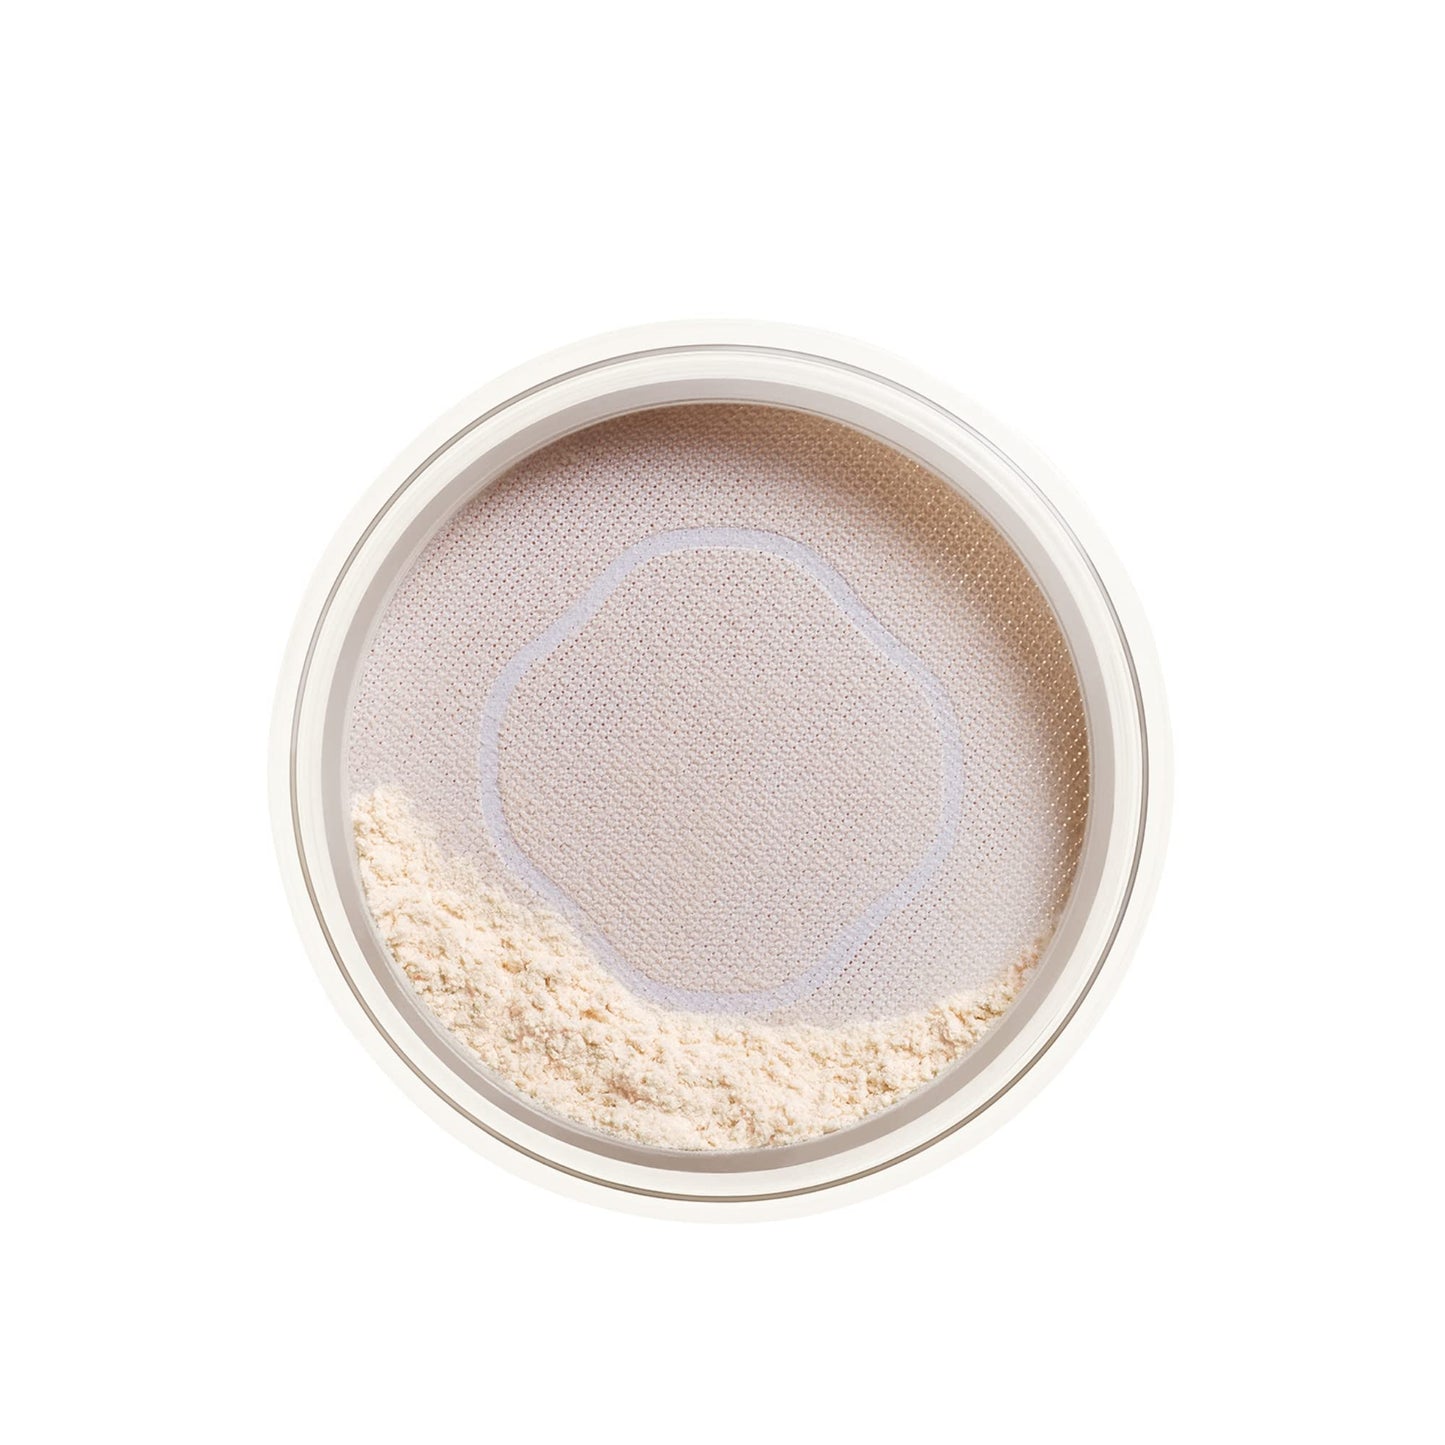 Shiseido Synchro Skin Invisible Silk Loose Powder, Radiant - Setting Powder for Smoother, More Polished Skin - 8-Hour Shine Control - Non-Comedogenic - All Skin Types & Tones